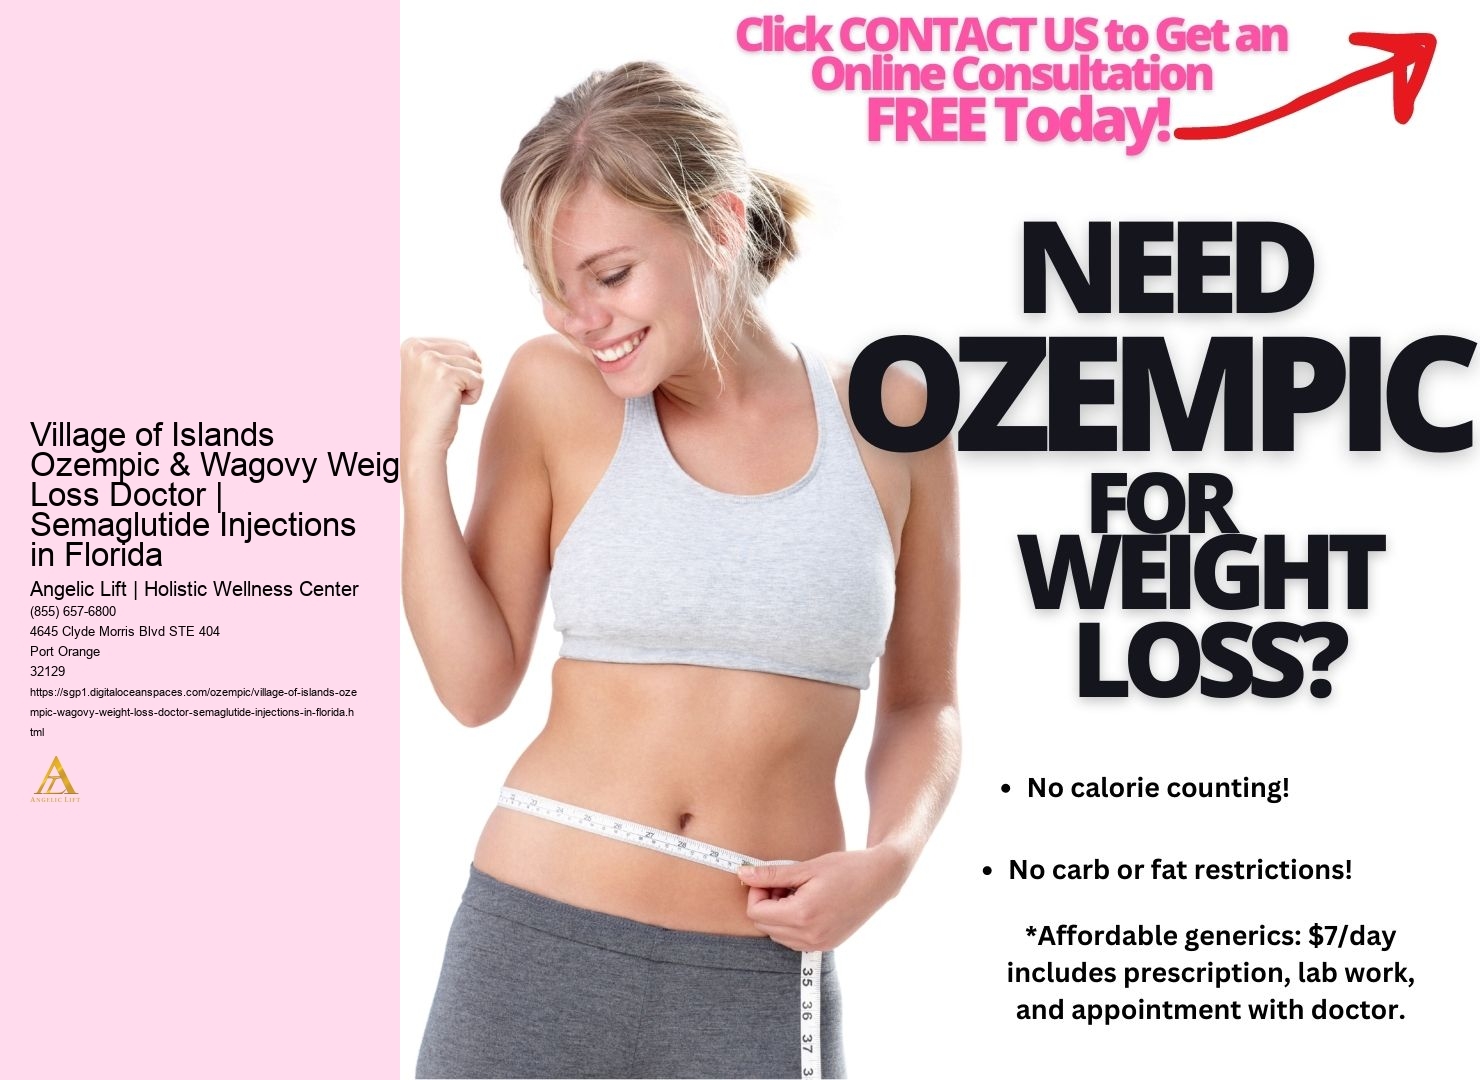 Village of Islands Ozempic & Wagovy Weight Loss Doctor | Semaglutide Injections in Florida